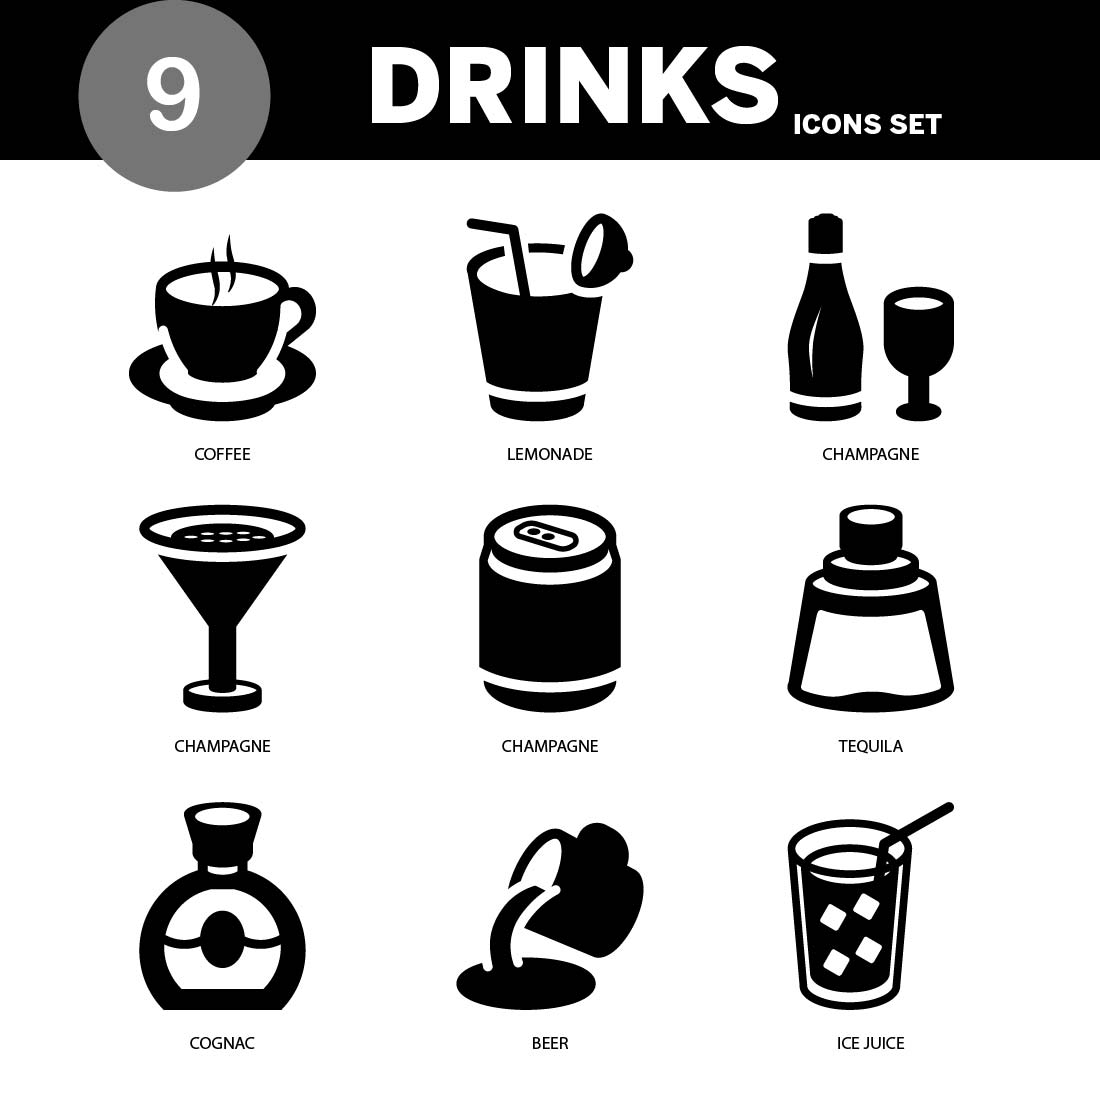 VECTOR DRINKS ICON SET IN BLACK VERSION cover image.